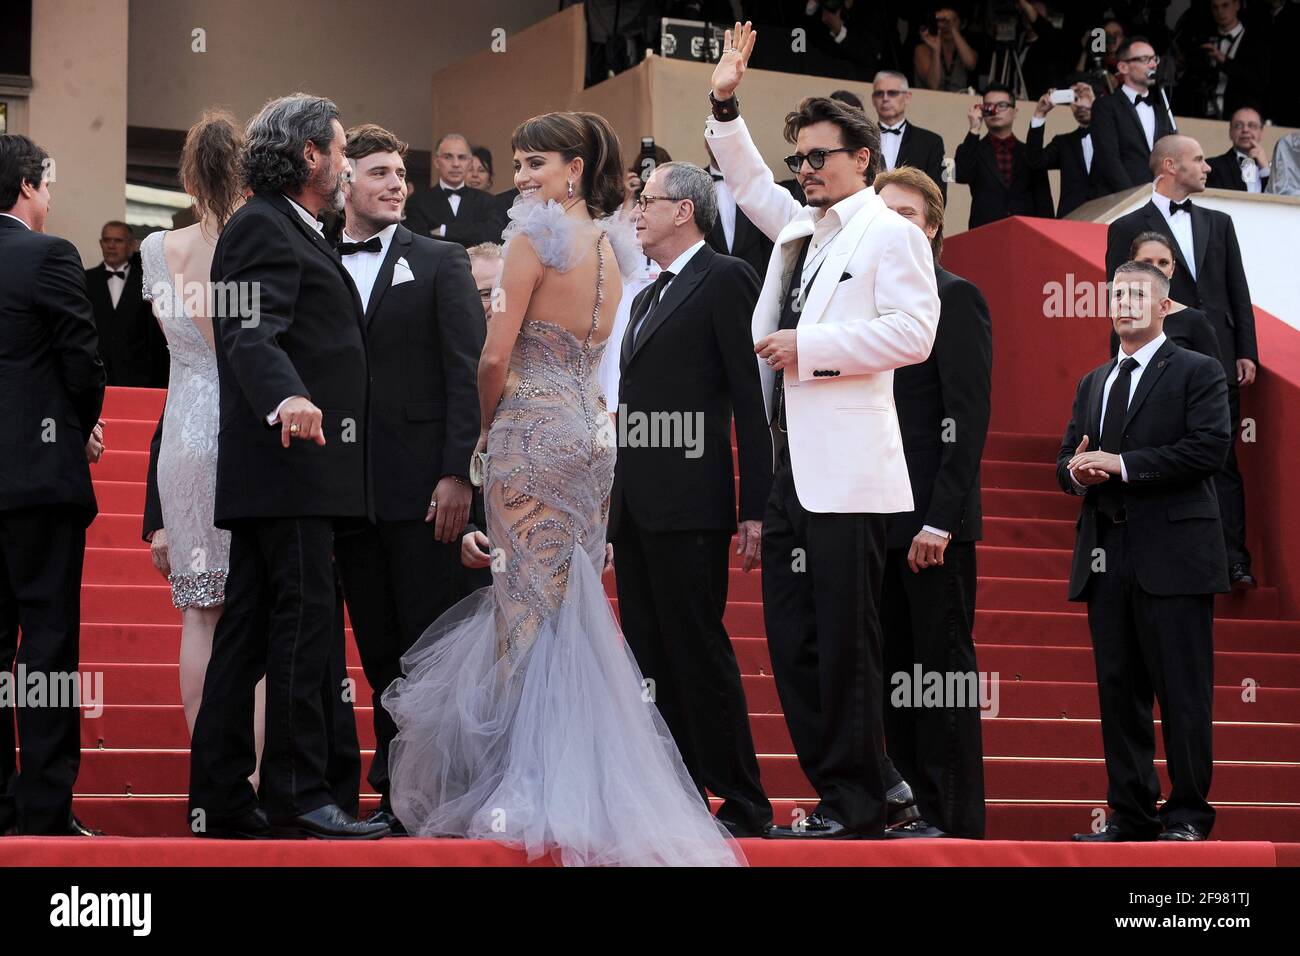 Cannes, France. 14 May 2011 Premiere film Pirates of the Caribbean ...